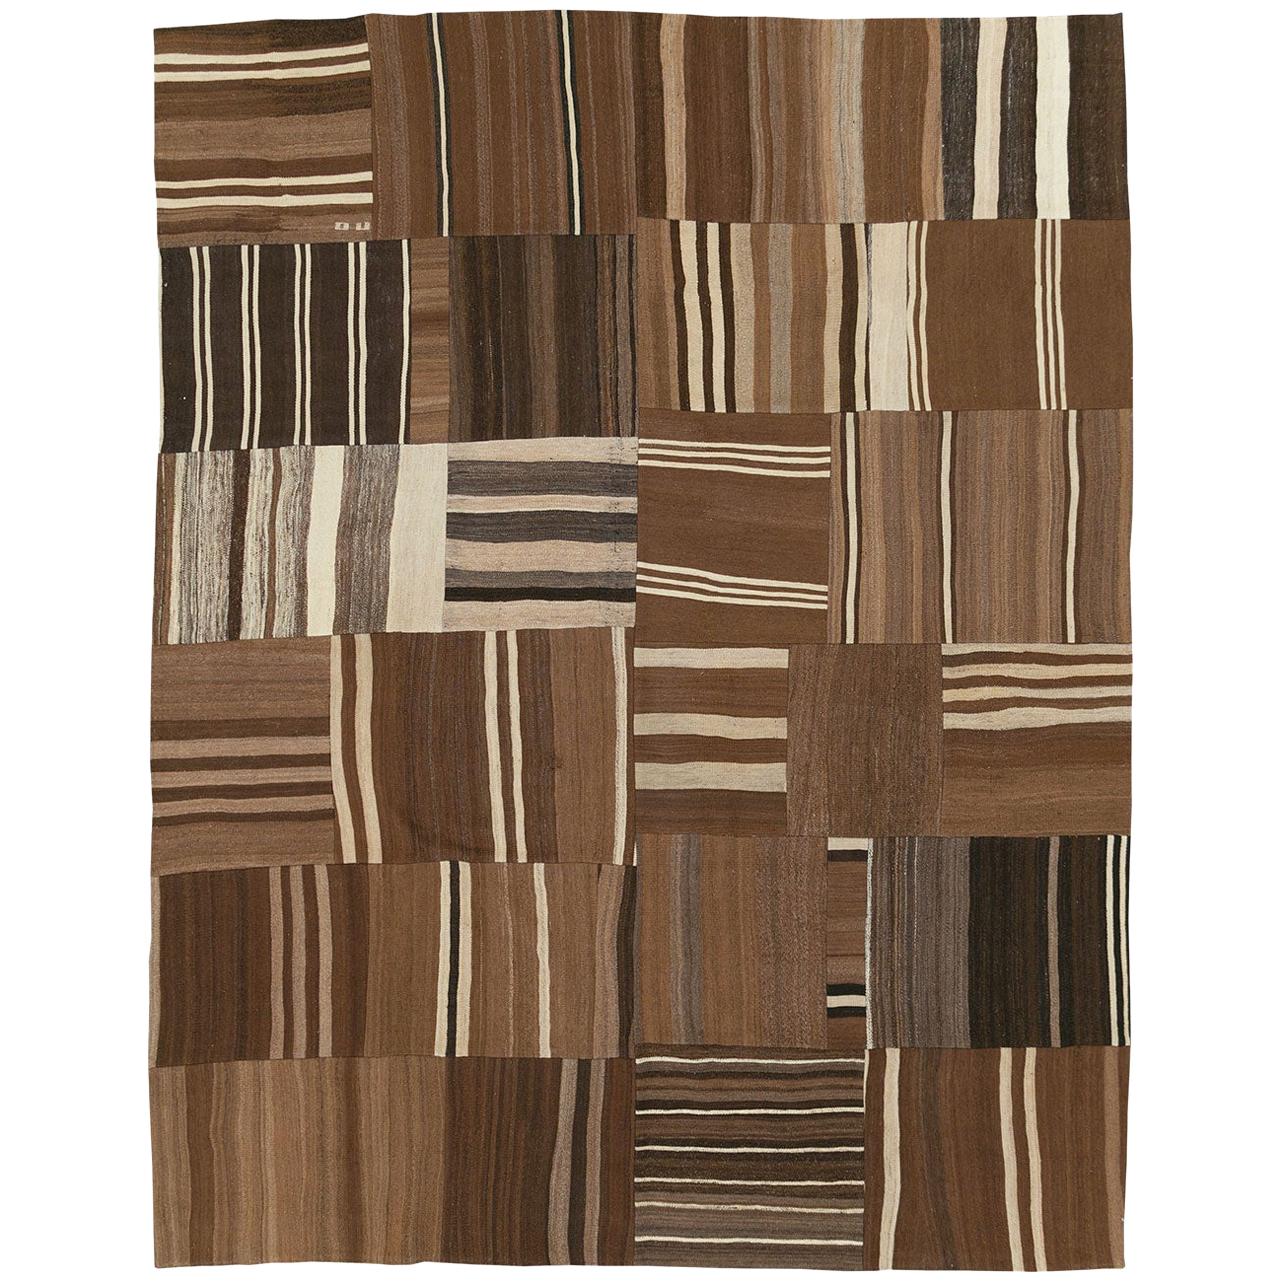 Contemporary Handmade Turkish Flat-Weave Kilim Room Size Carpet in Brown Shades